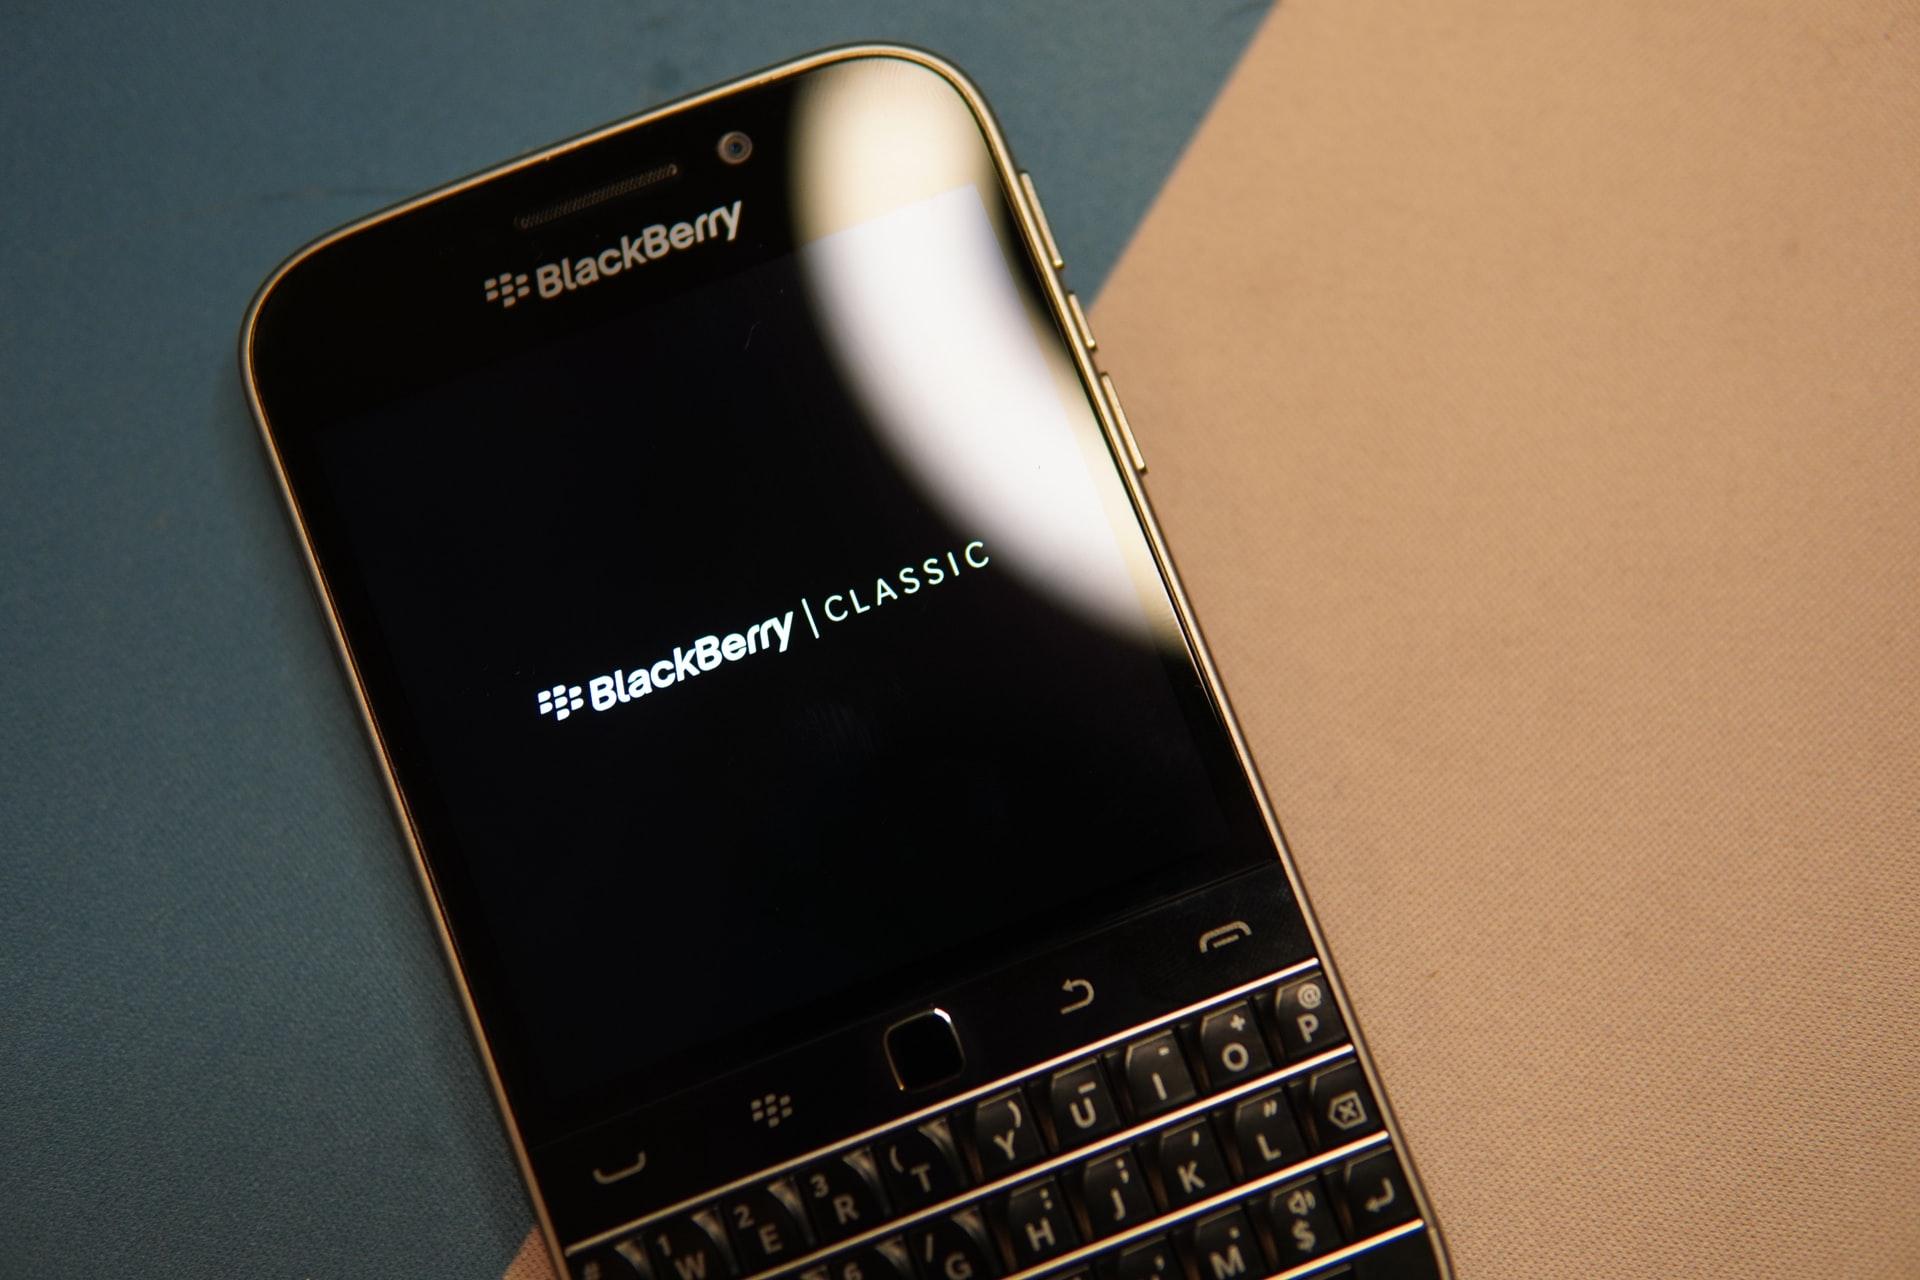 BlackBerry is making moves in the auto industry.